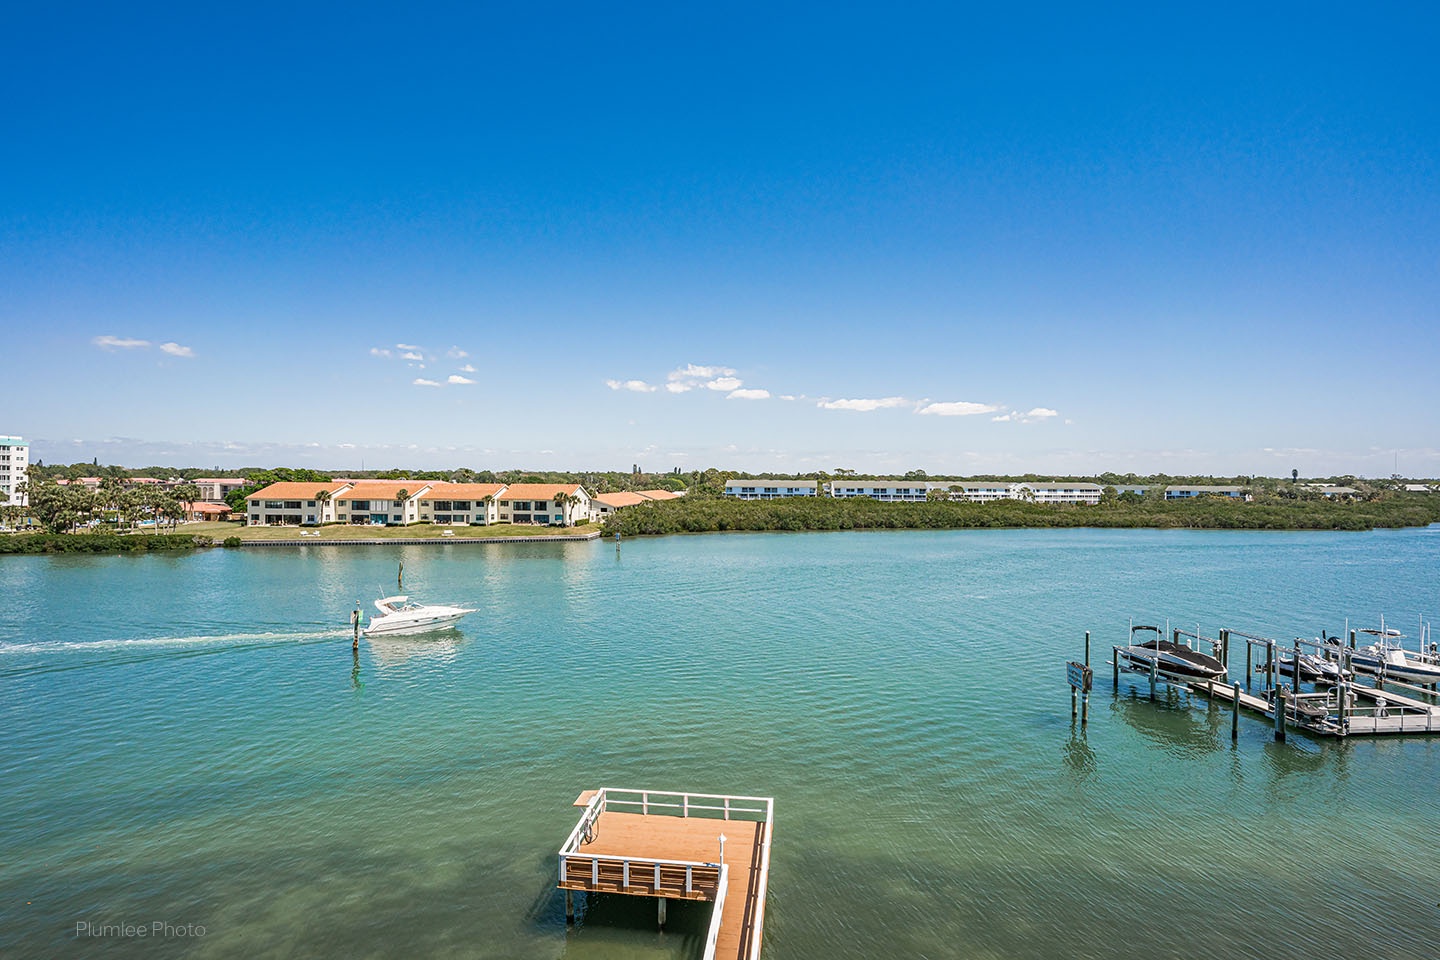 View of the Intracoastal Waterway and community fishing & lounging dock.